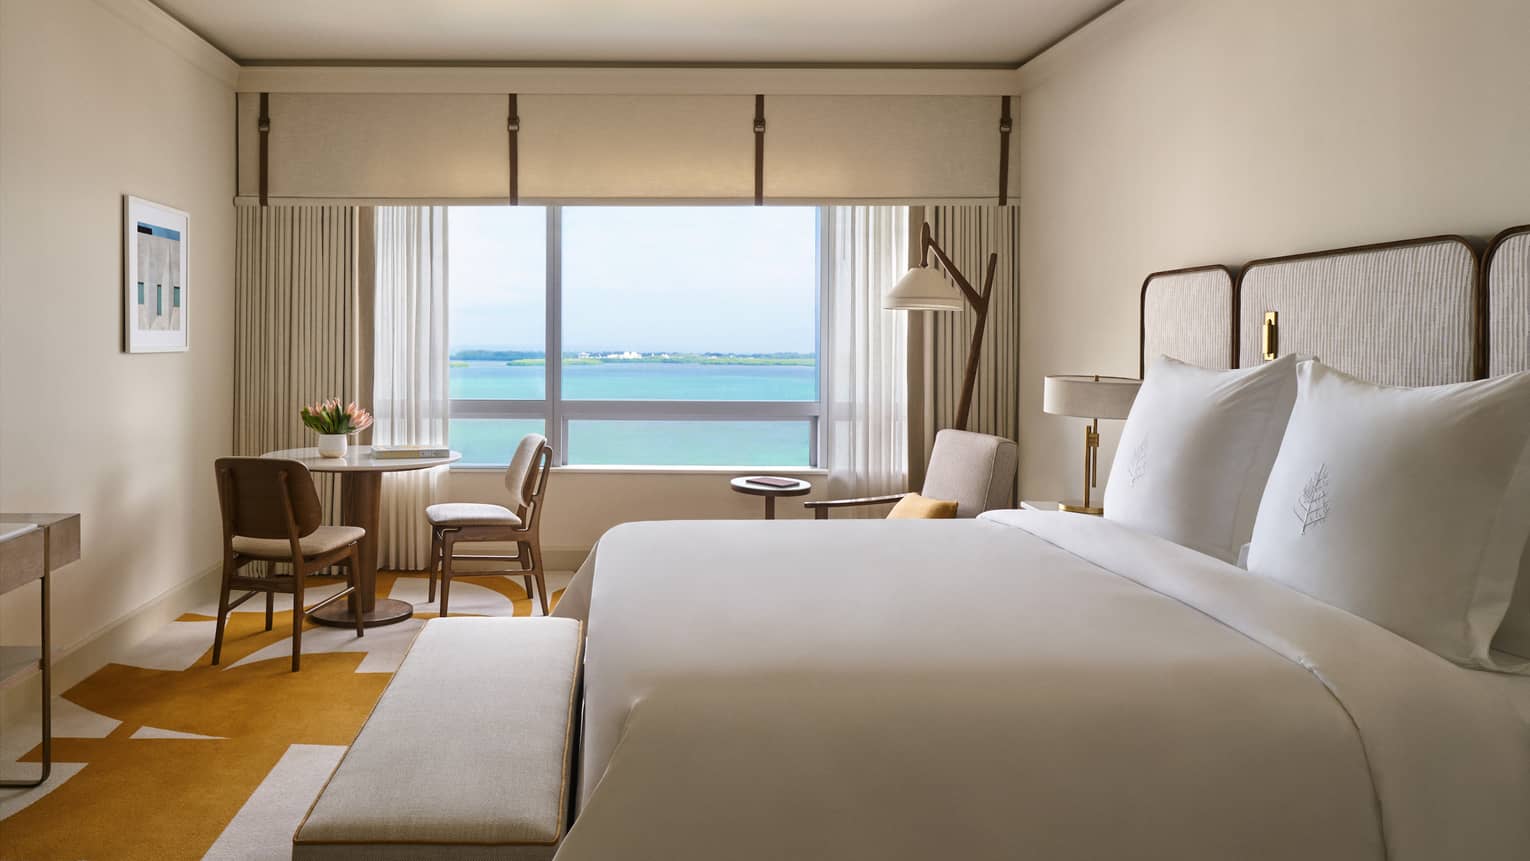 Elegant and serene guest room at the Four Seasons Hotel in Miami, featuring a large bed with white linens and a beige headboard. The room includes a small seating area with two chairs and a table, all bathed in natural light from floor-to-ceiling windows offering a stunning view of the bay.